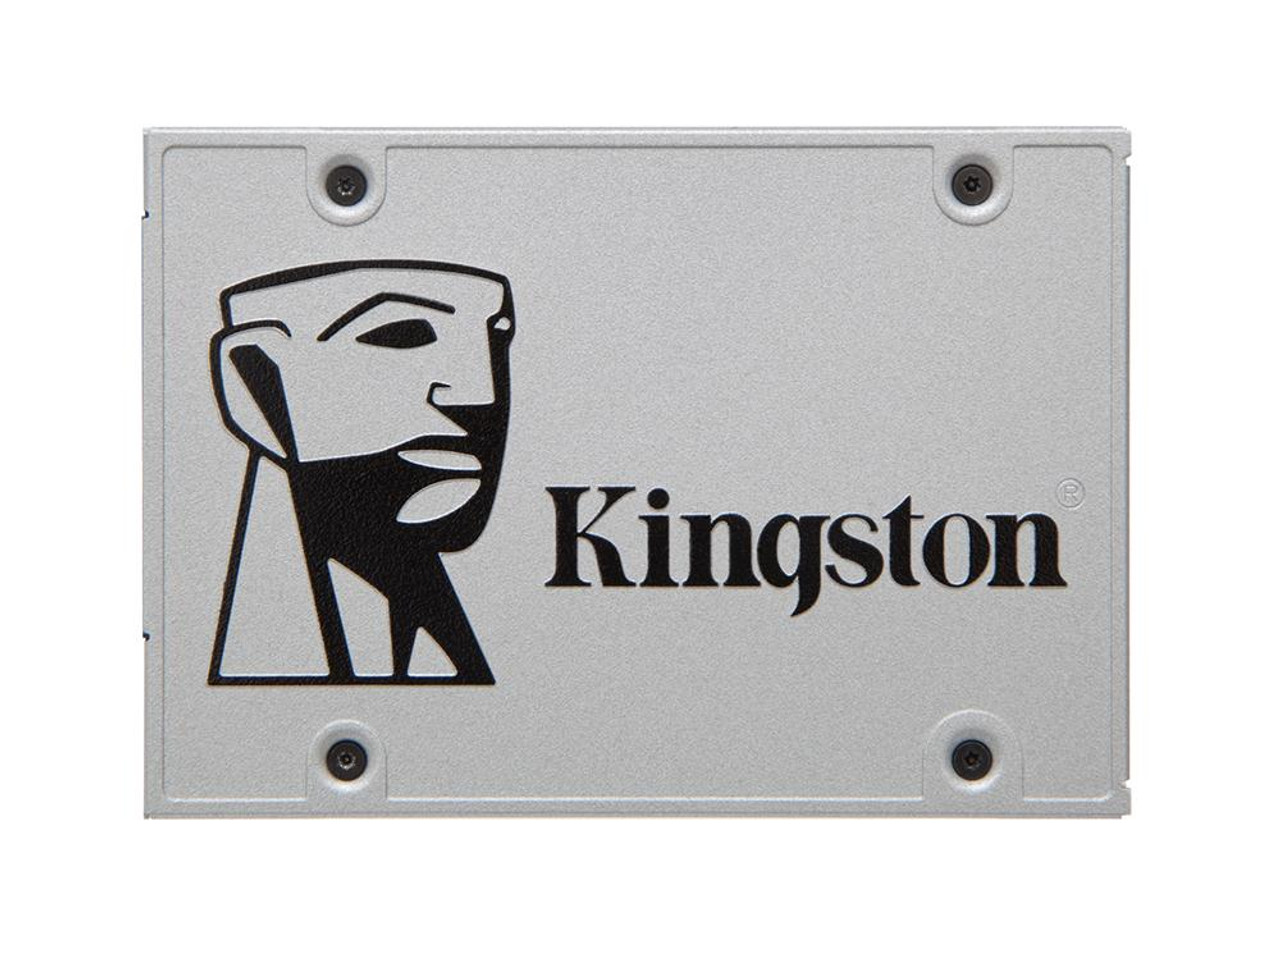 SUV500/960G Kingston SATA 6.0 Gbps 960GB Solid State Drive